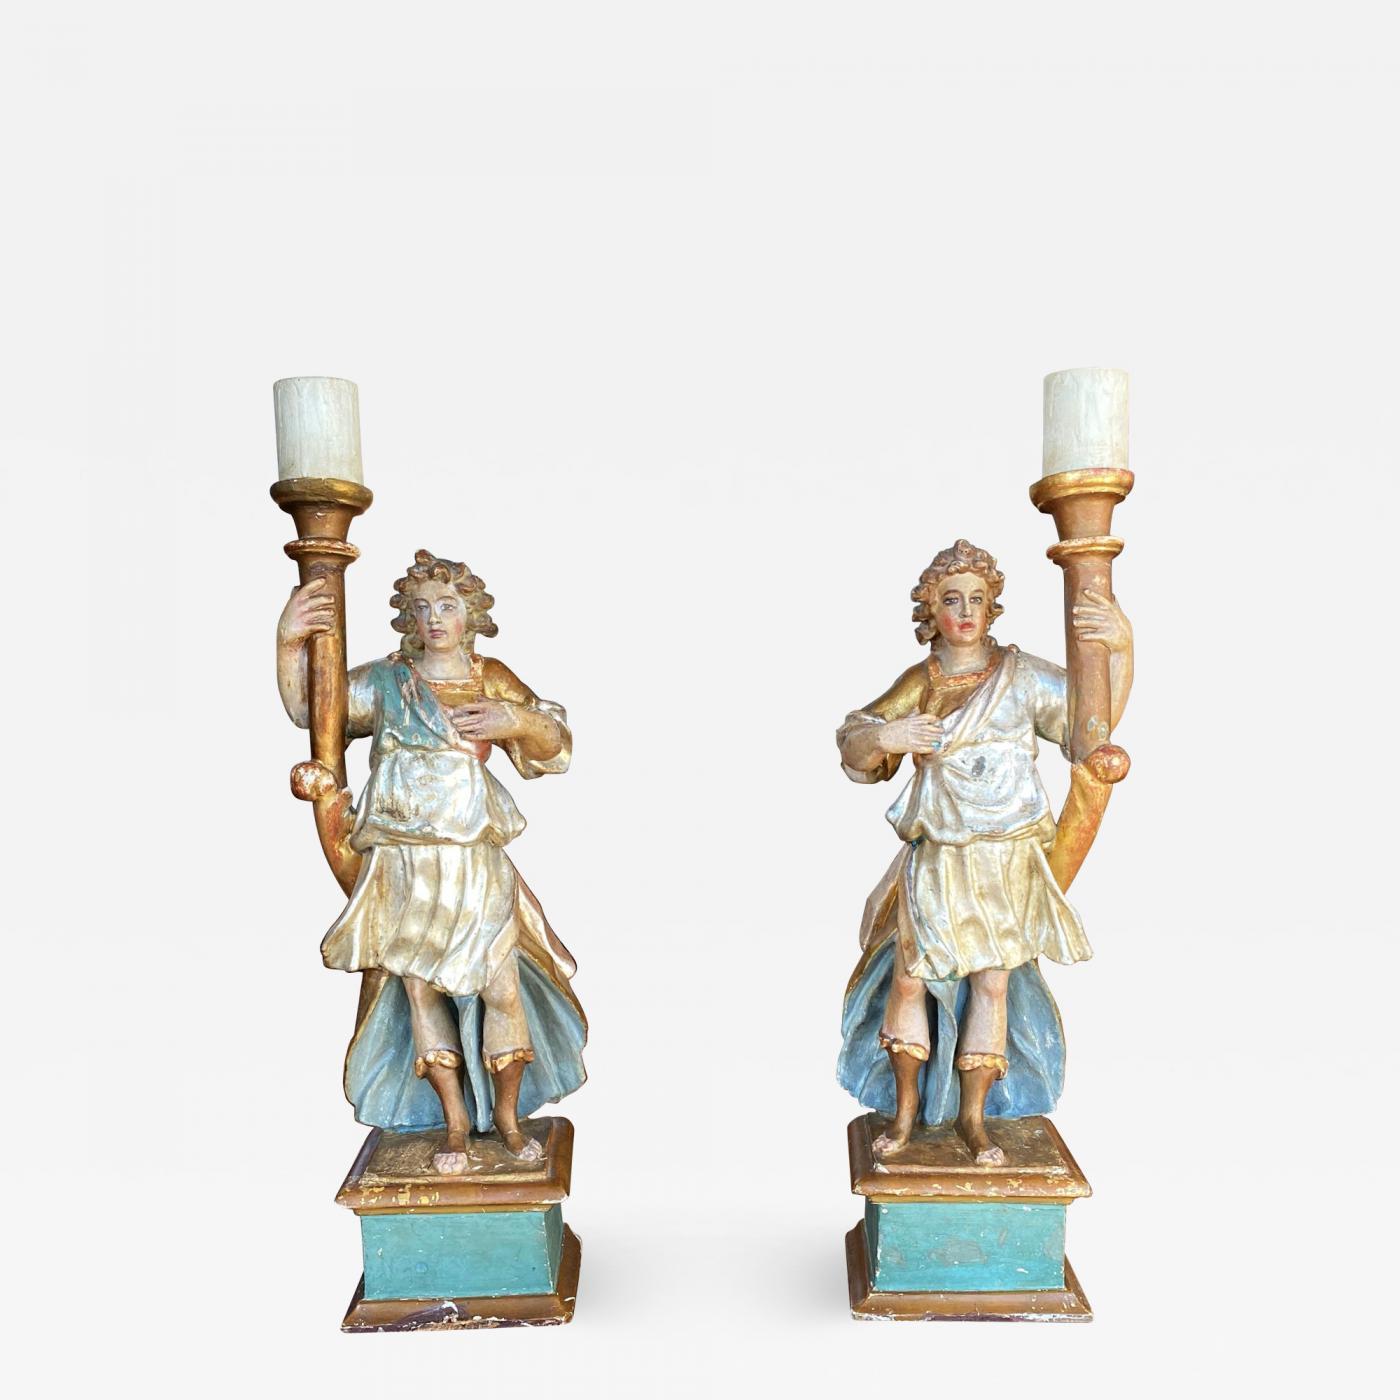 Pair of Italian Giltwood and Polychrome Torchères, circa 1750 For Sale 2